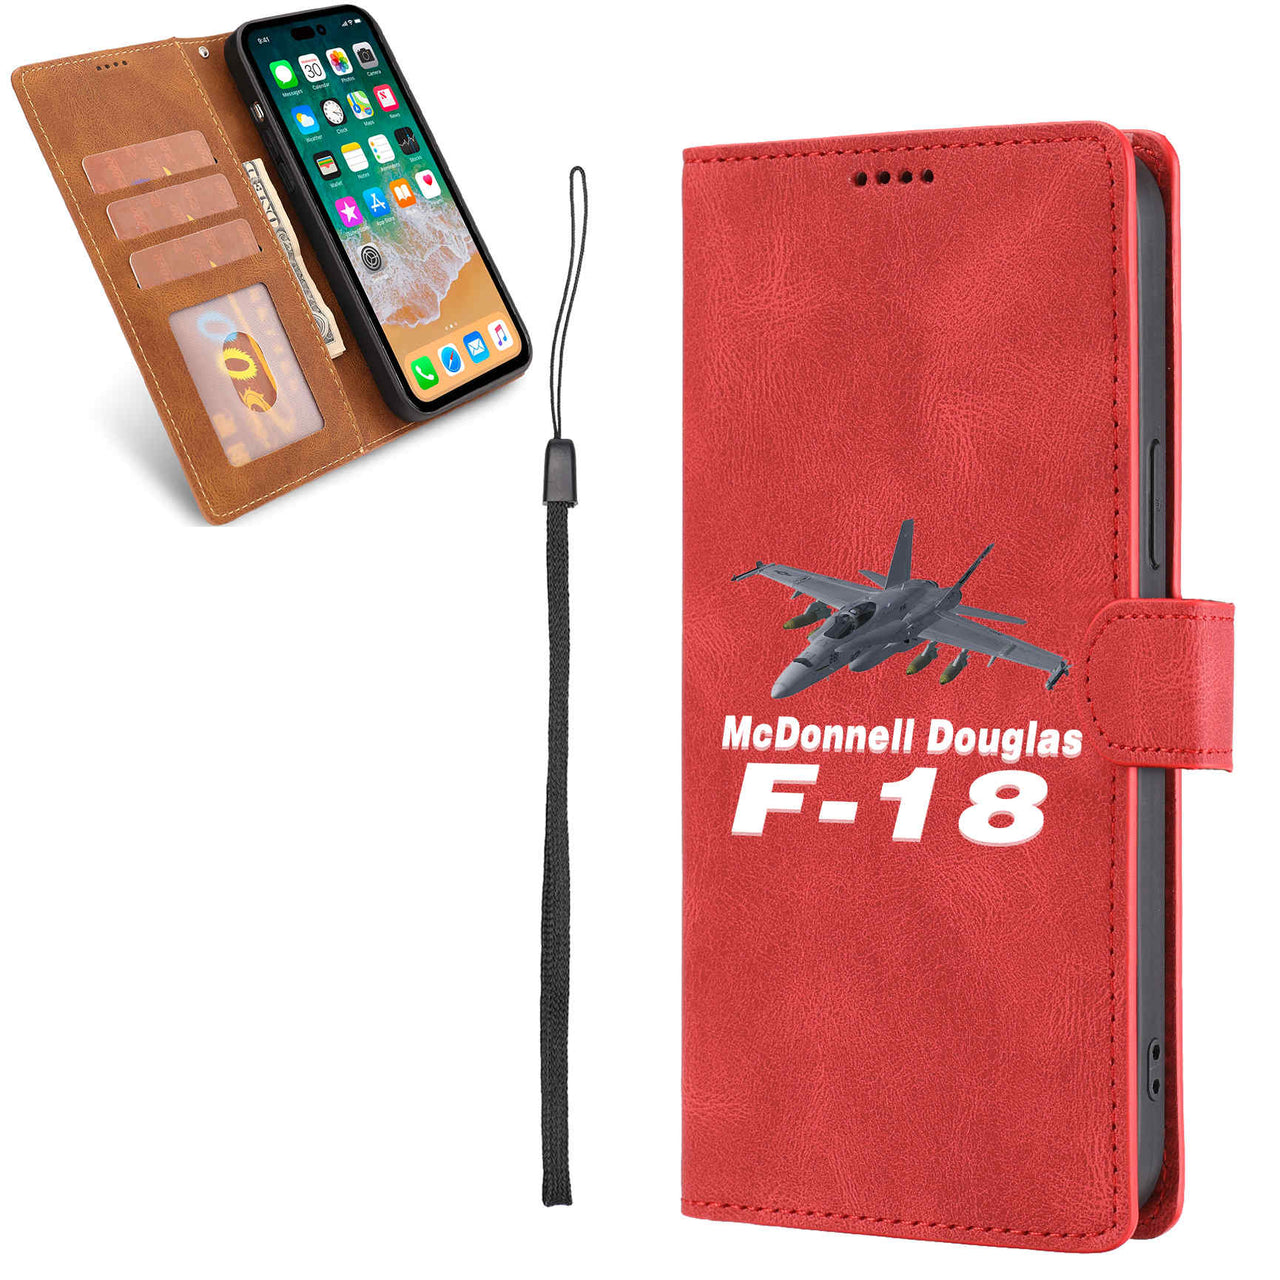 The McDonnell Douglas F18 Designed Leather Samsung S & Note Cases